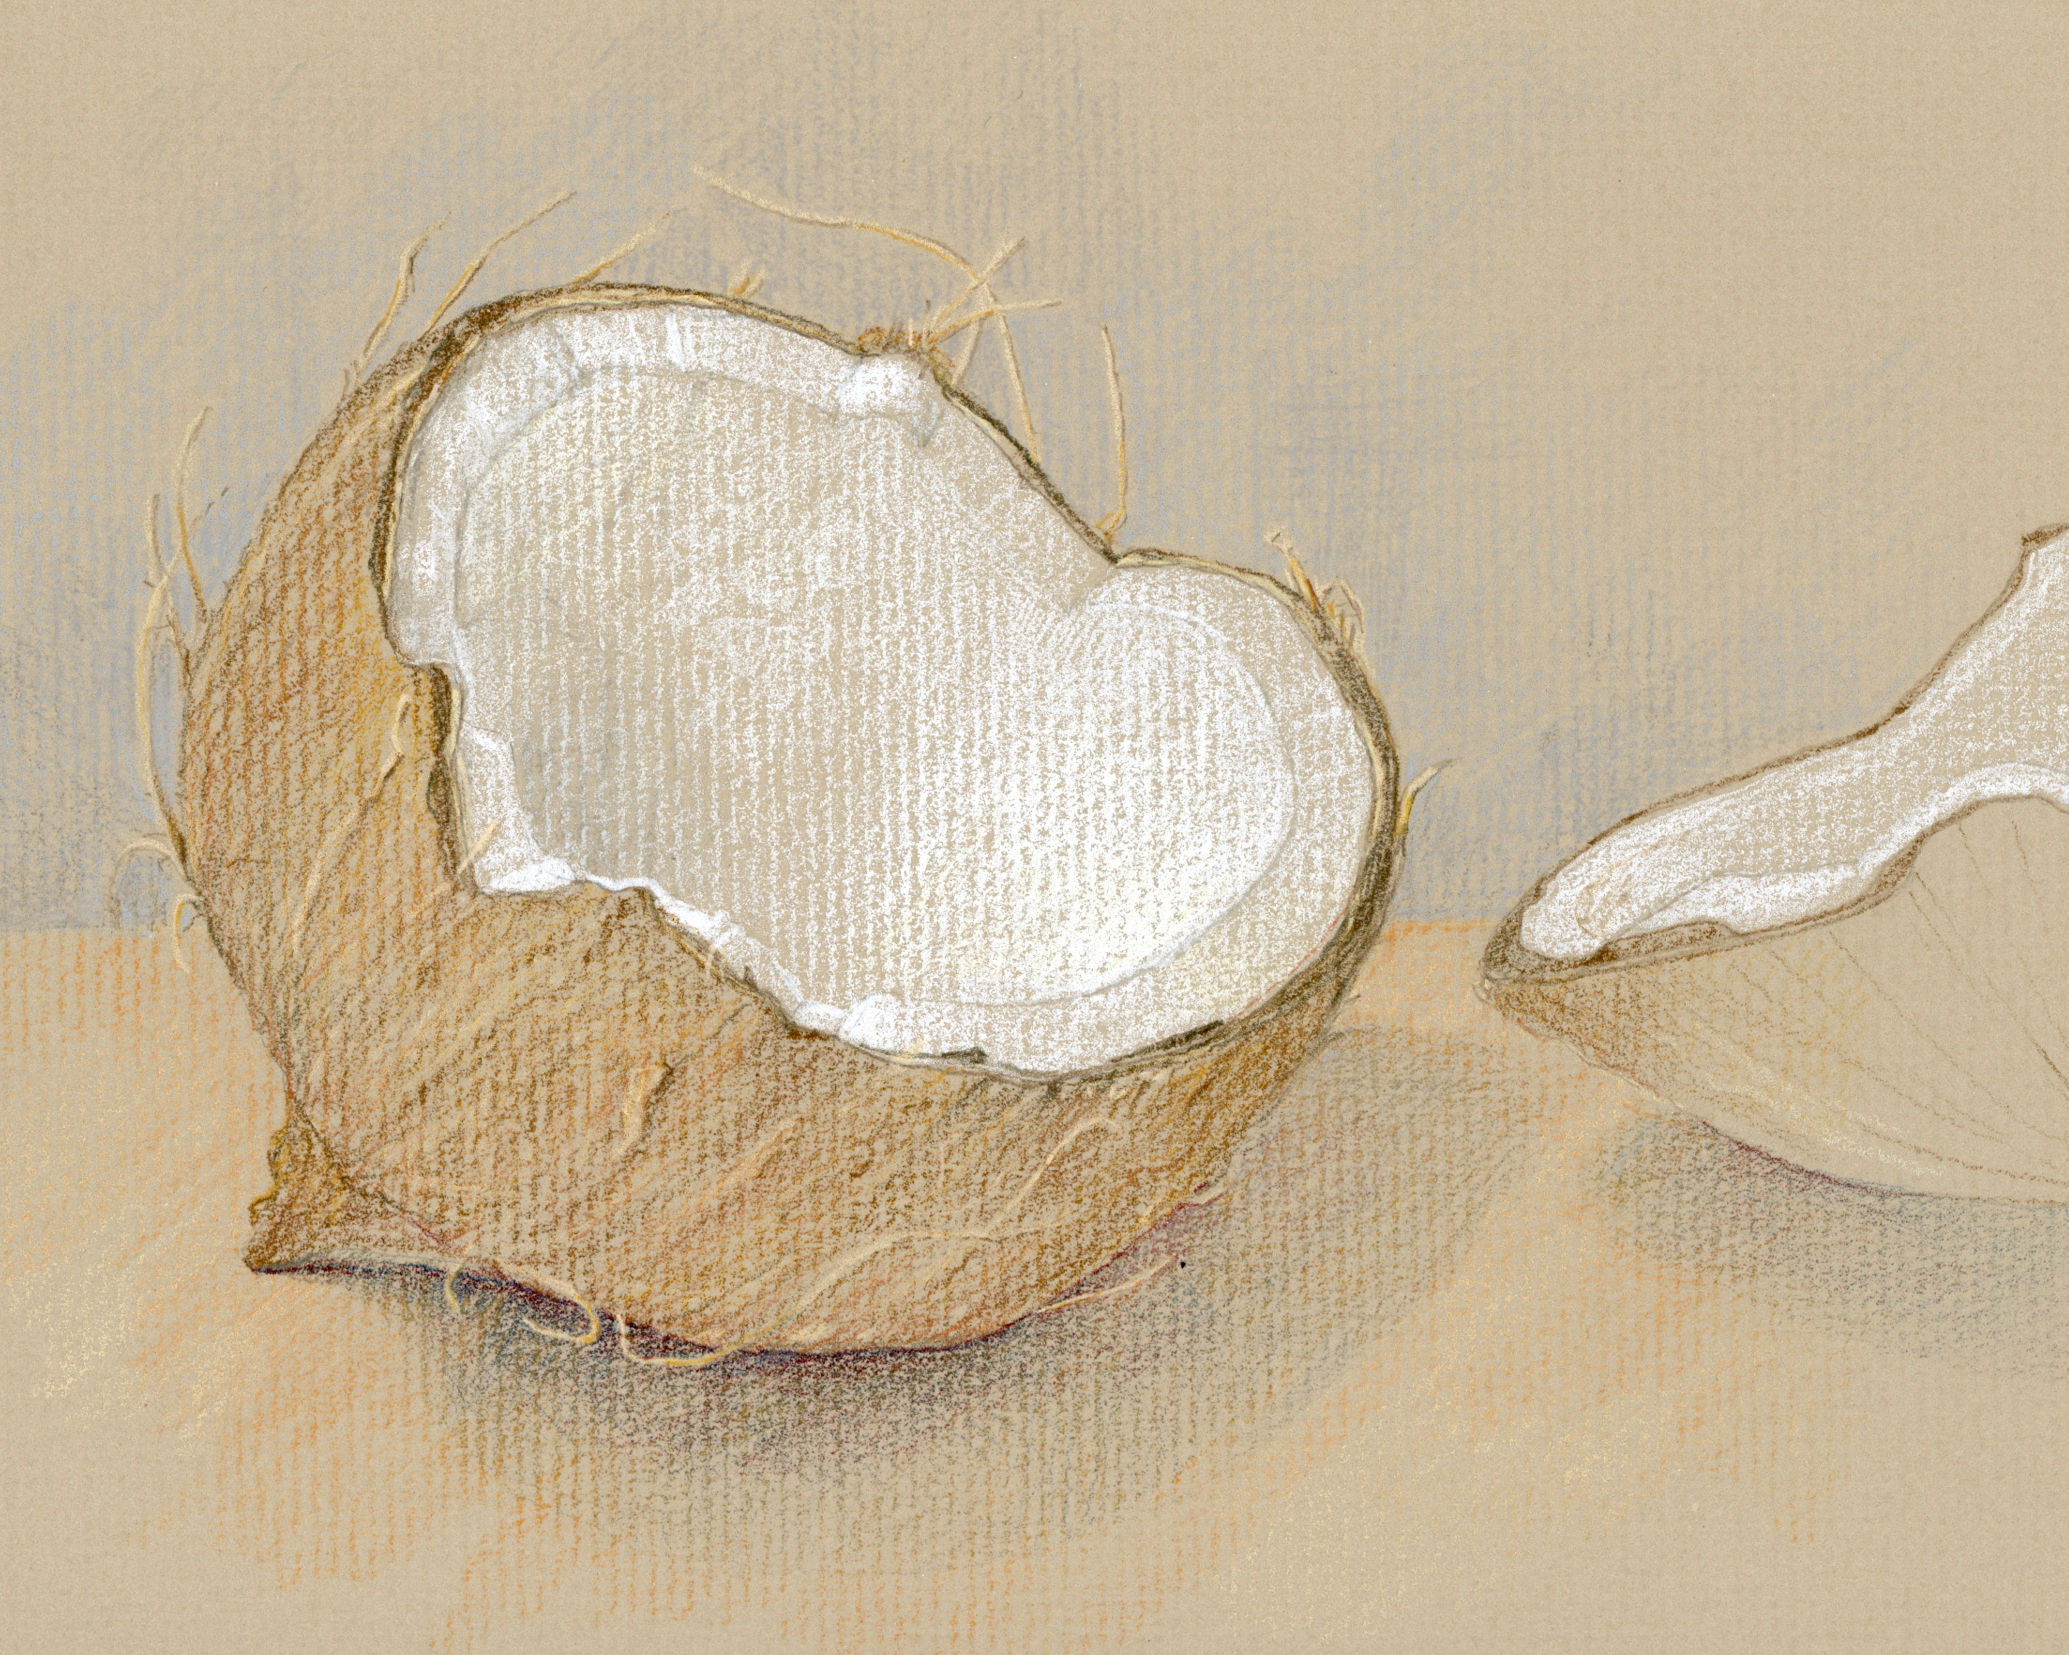 Coconut, colored pencil on toned paper